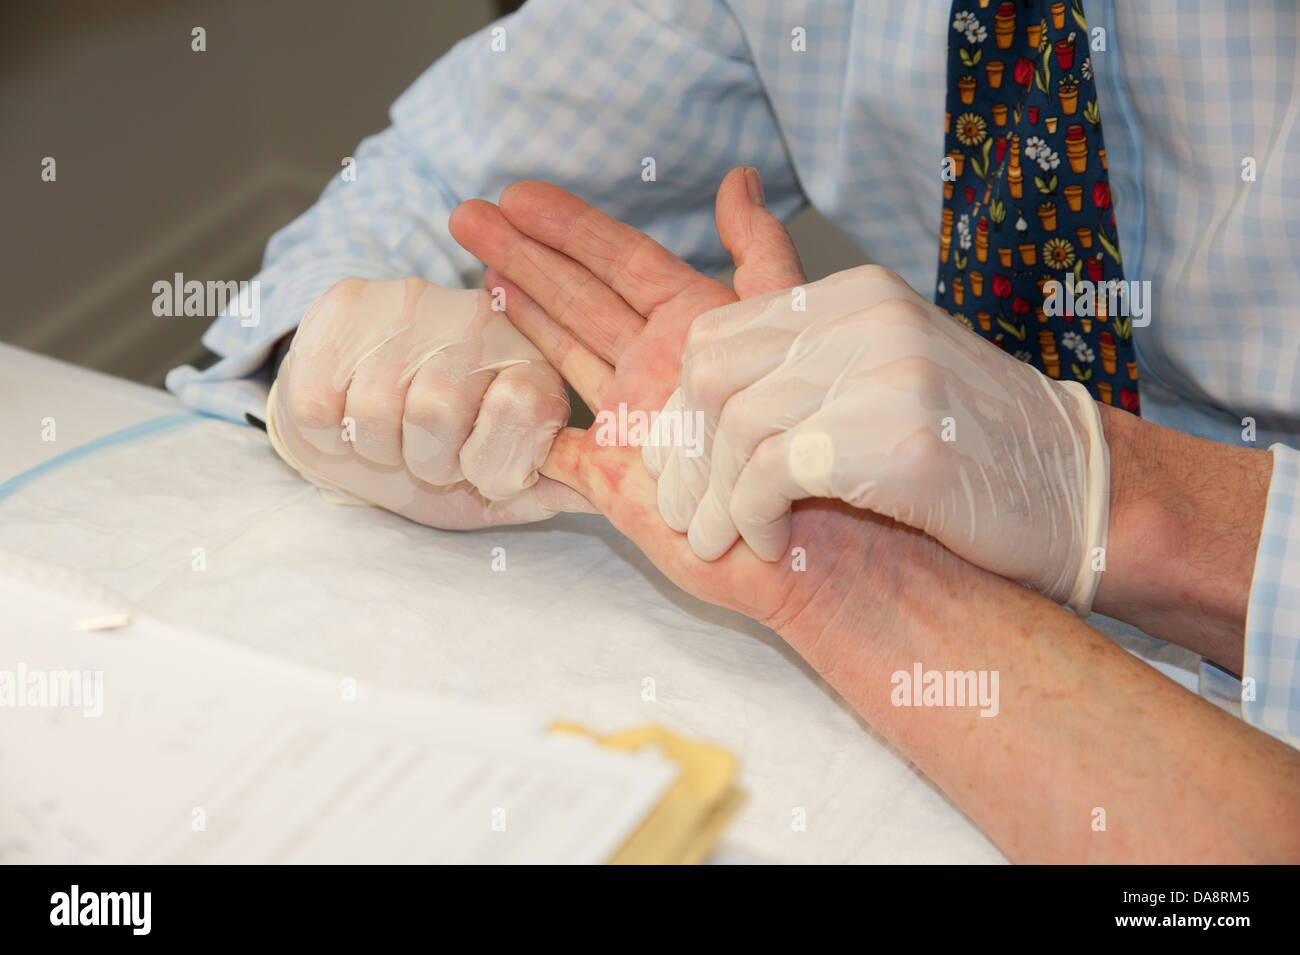 Dupuytren's contracture treatment of the little finger on a woman's hand doctor manipulating hand following procedure Stock Photo